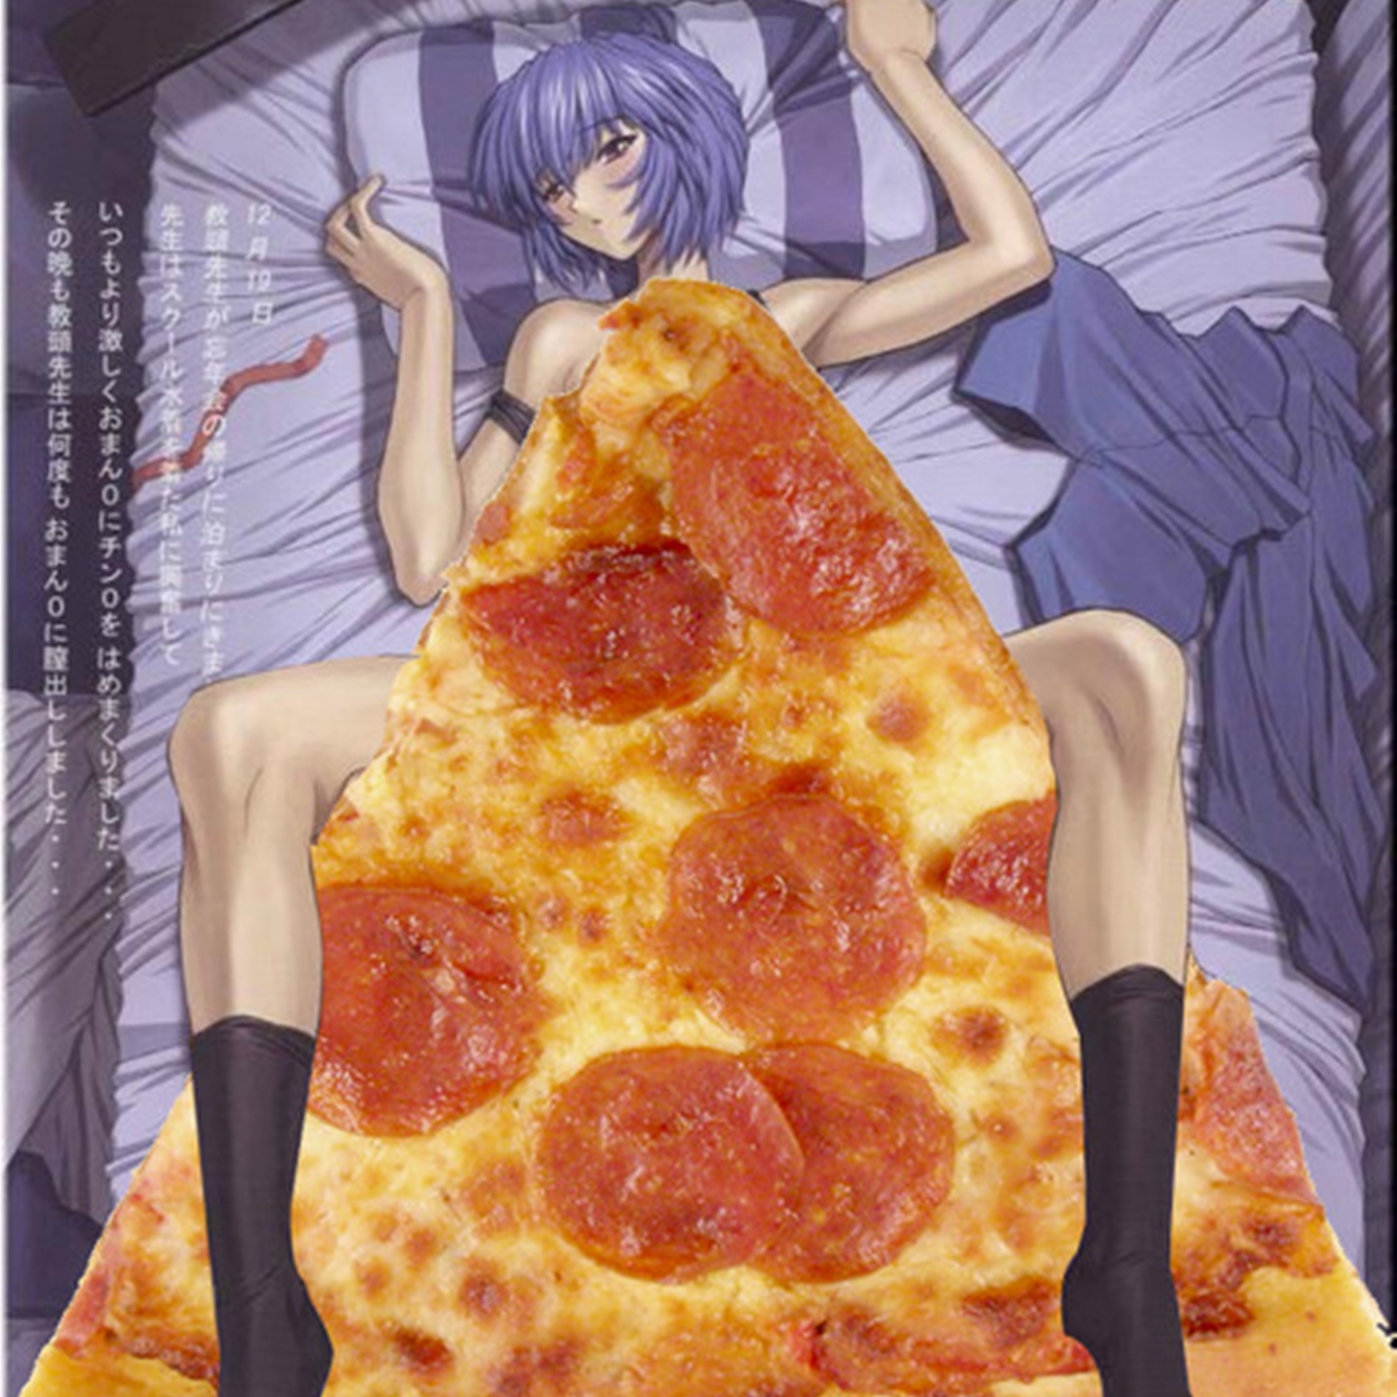 Summer fucks delivery pizza girl free porn images